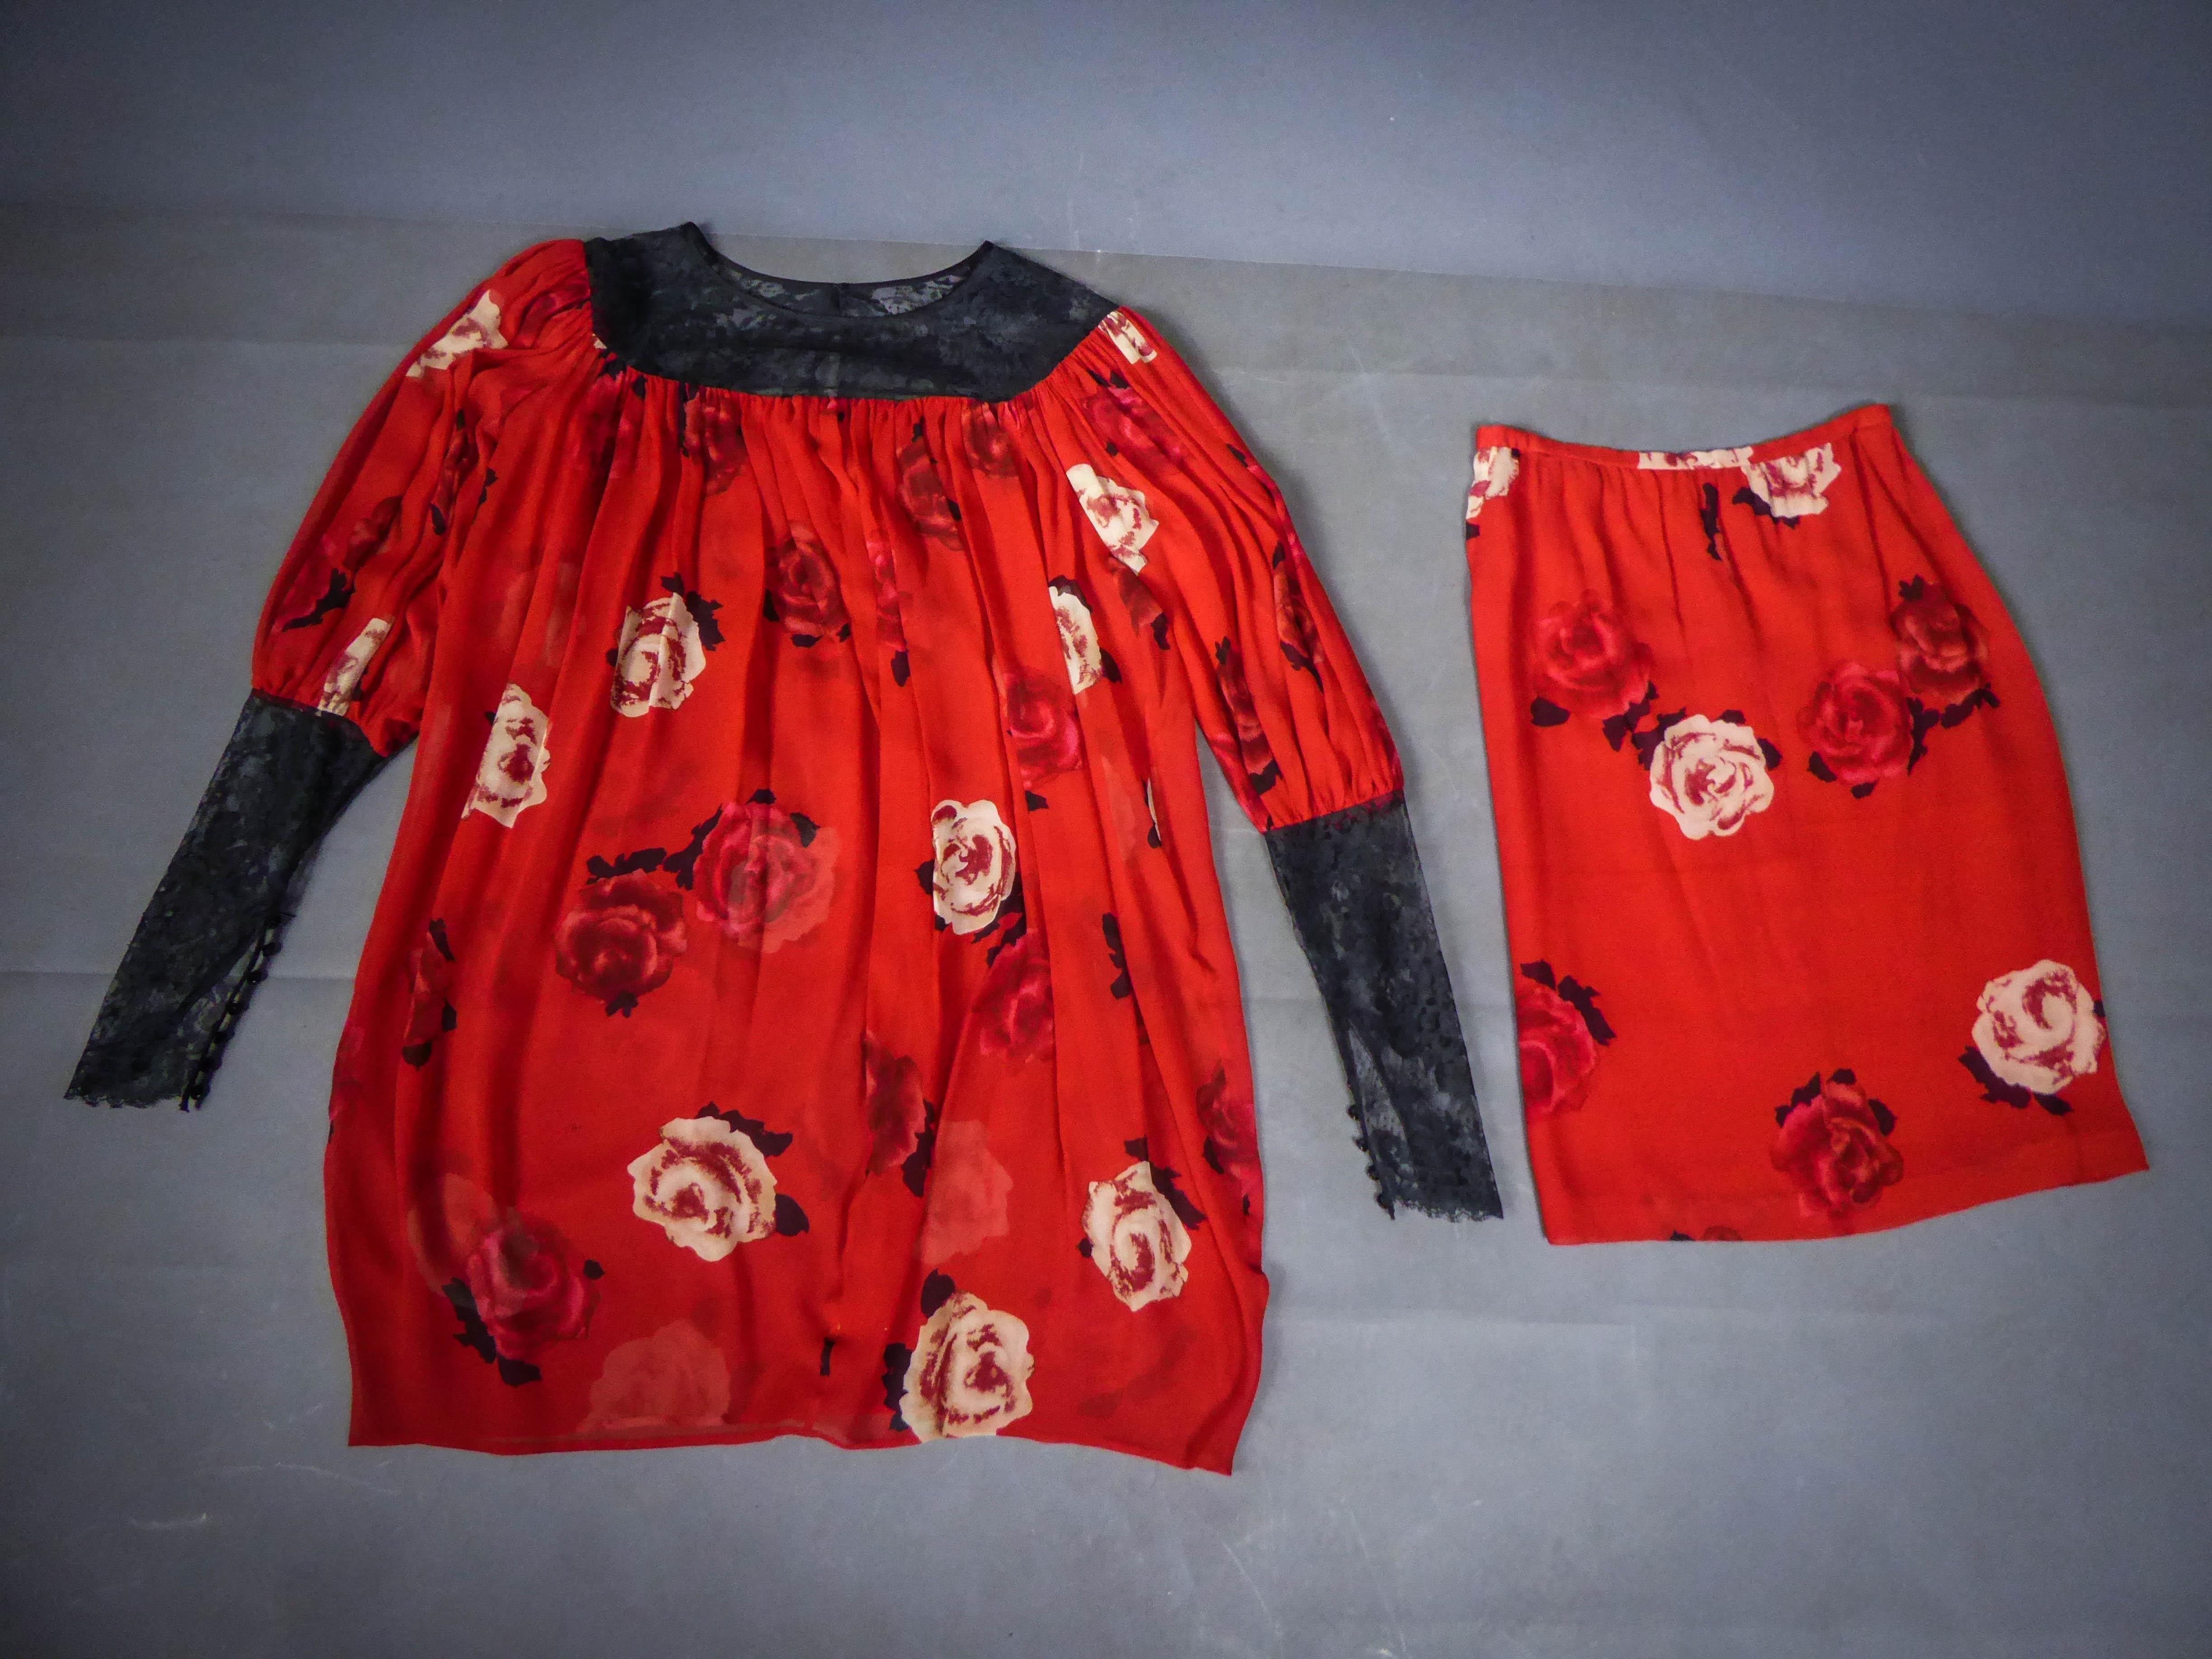 Circa 1989
France

Yves Saint Laurent Haute Couture skirt and blouse set in red silk crepe and print of black and white roses from the late 1980s. No label set. Silk crepe of the Abraham House. Loose cut of the blouse with puff sleeves tightened at